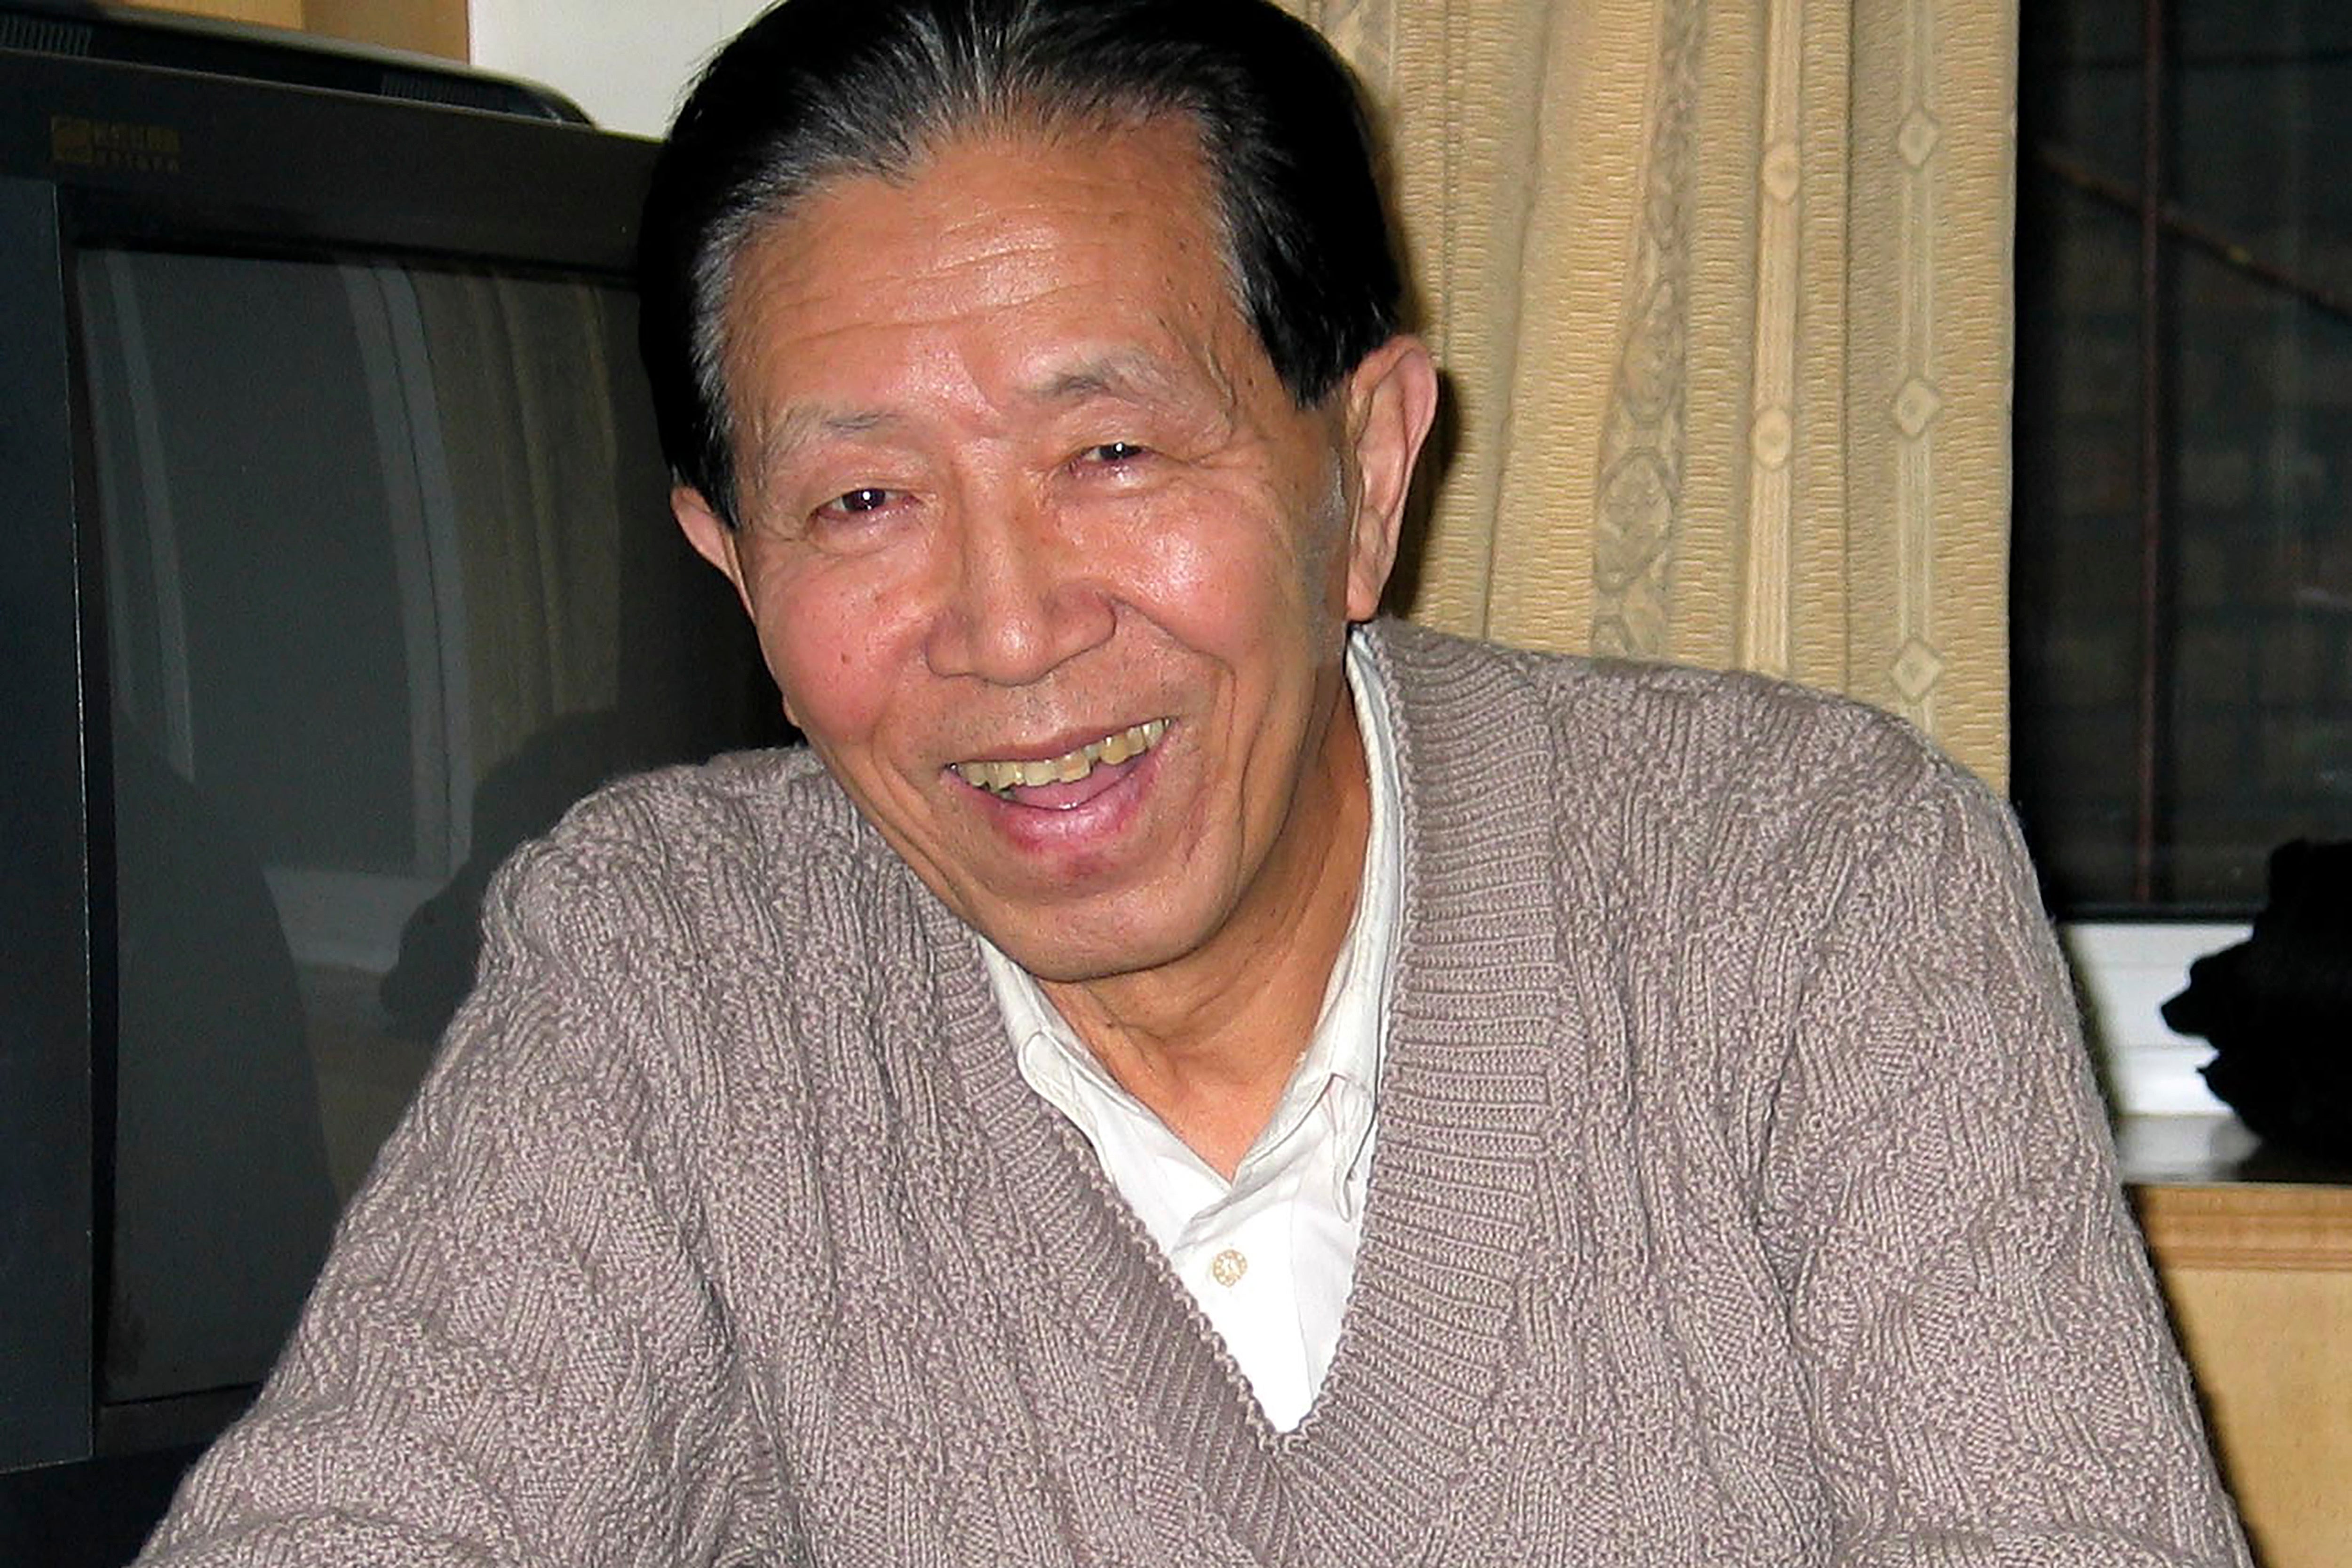 Jiang Yanyong died of pneumonia and other illnesses on Saturday, according to two of his friends